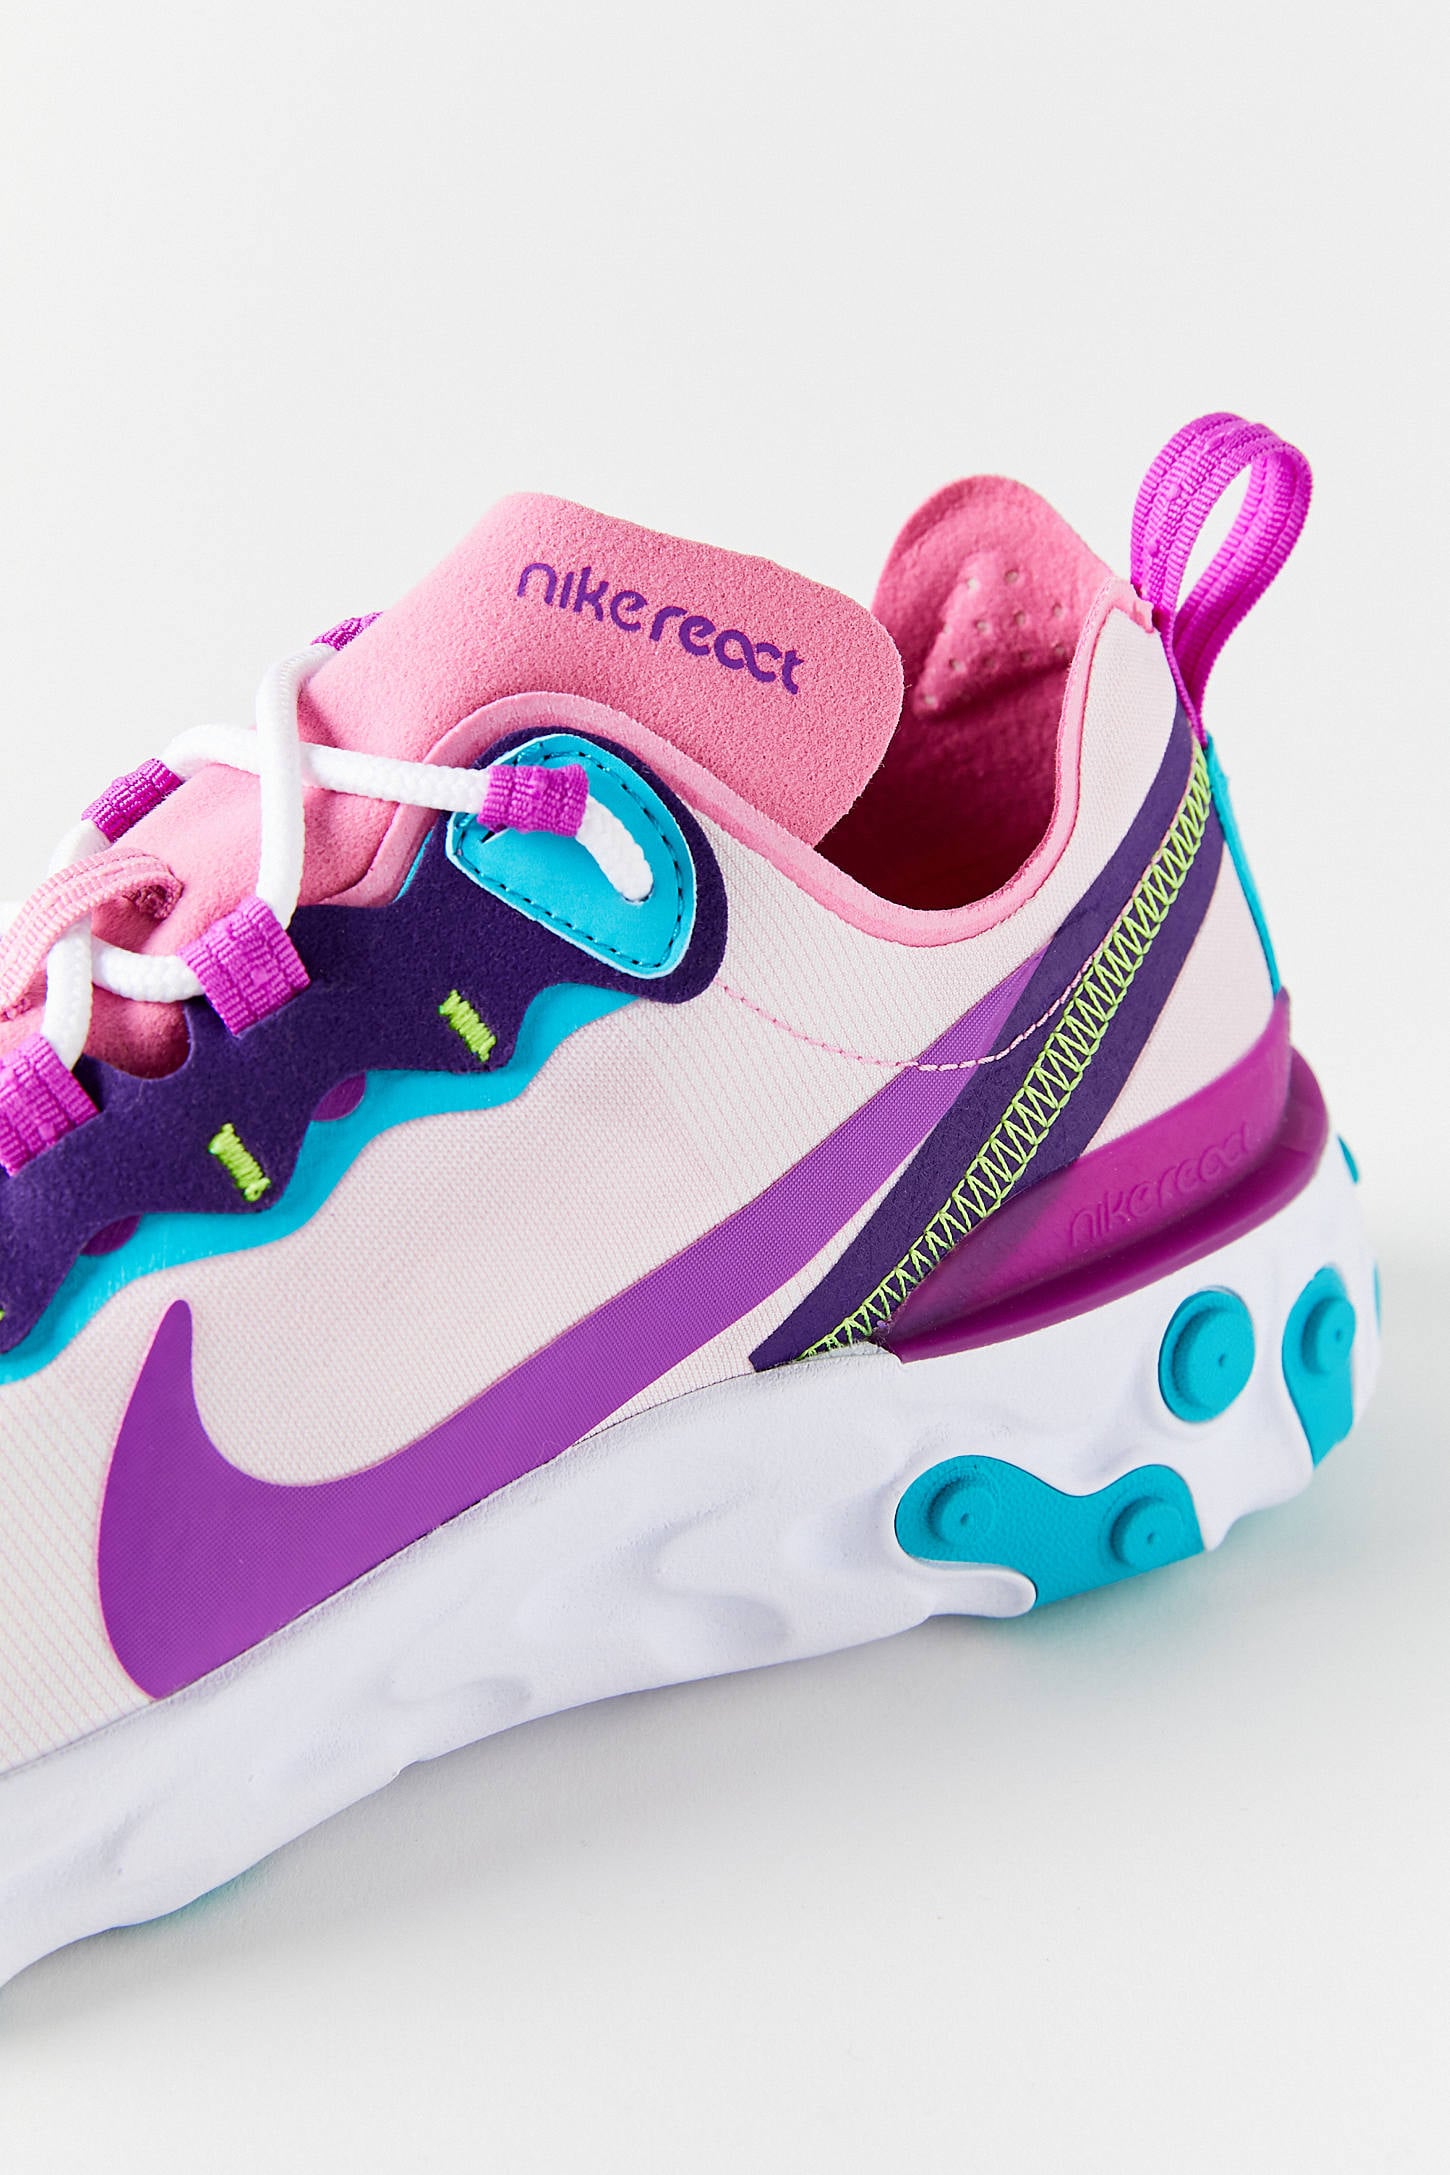 pink and purple sneakers